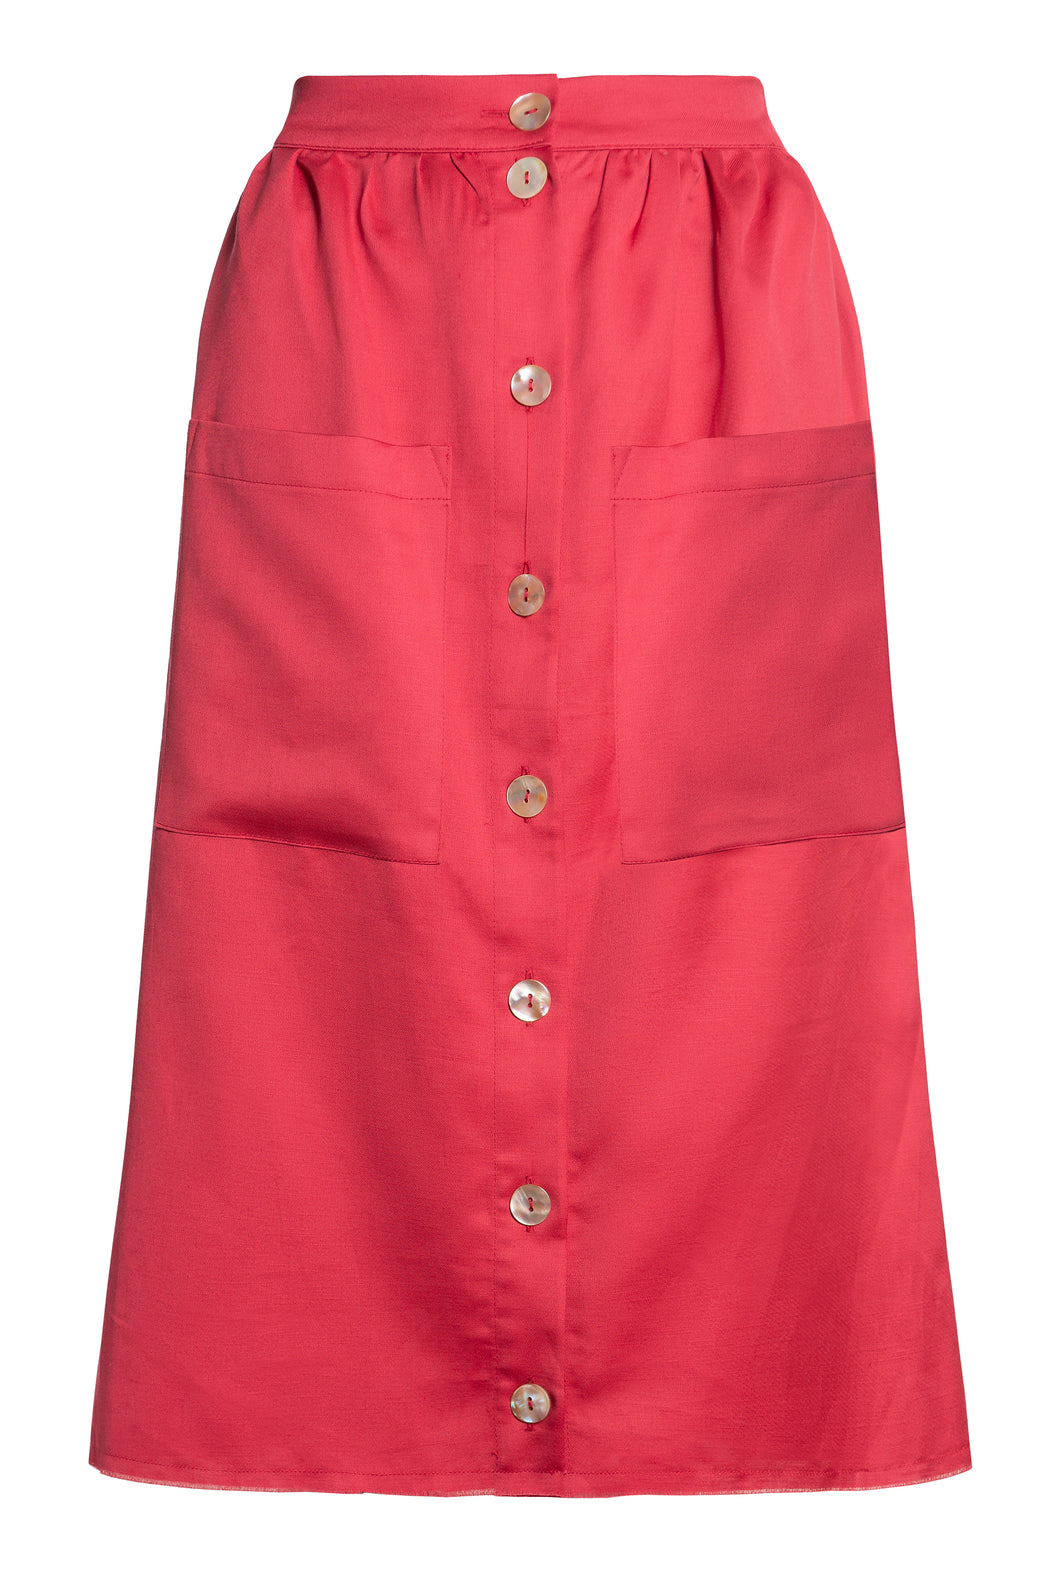 Reed skirt / cherry red